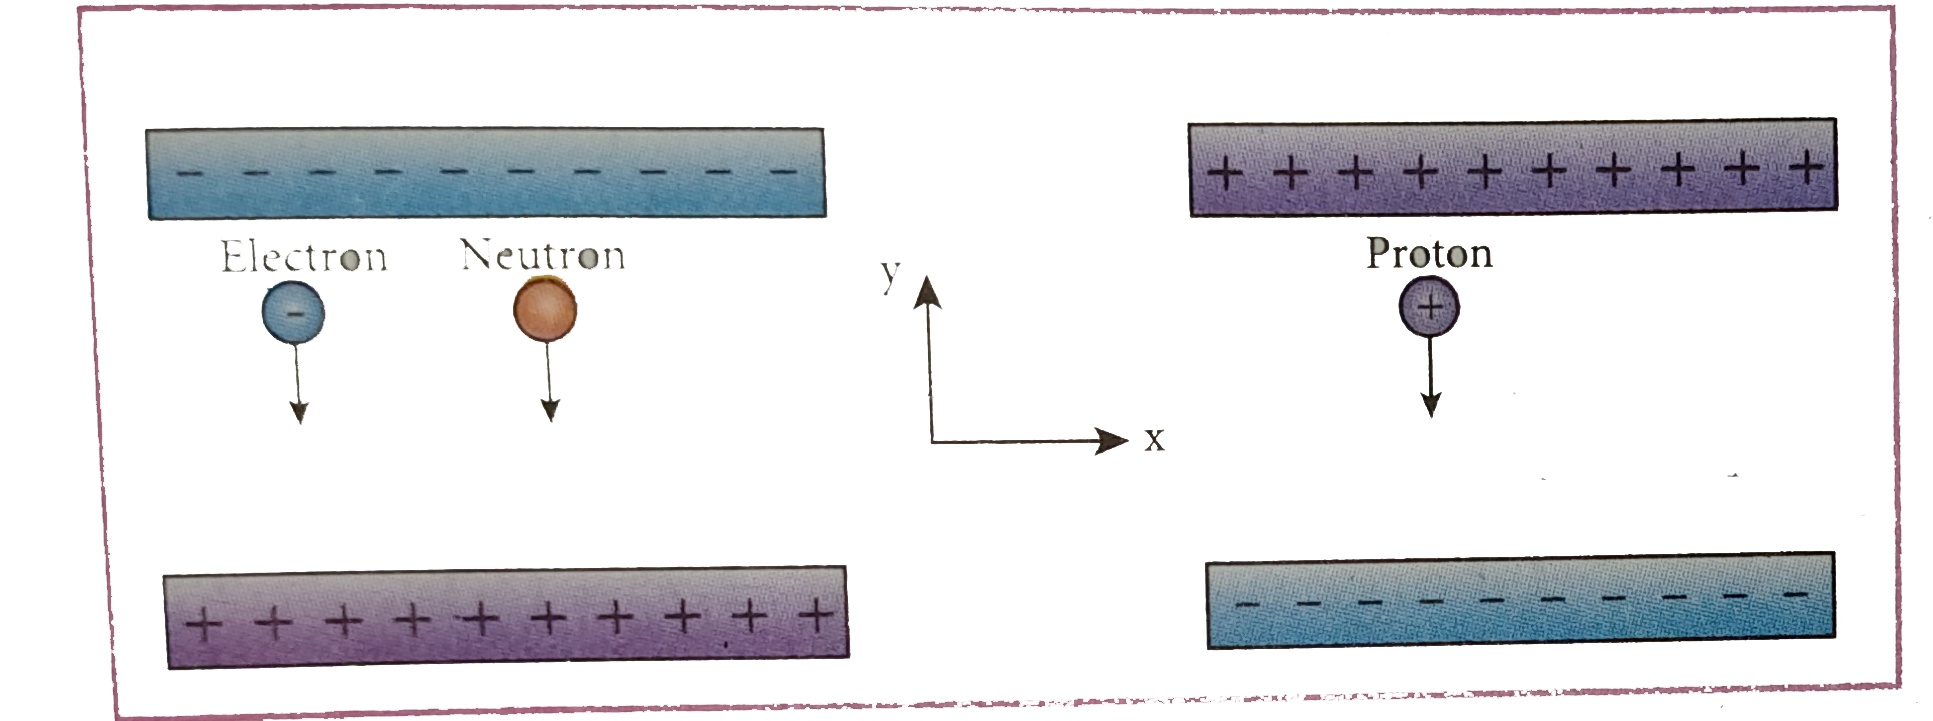 An electron and a proton are allowed to fall through the separation between the plates of a parallel plate capacitor of voltage 5 V and separation distance h=1 mm as shown in the figure.      (a) Calculate the time of flight for both electron and proton